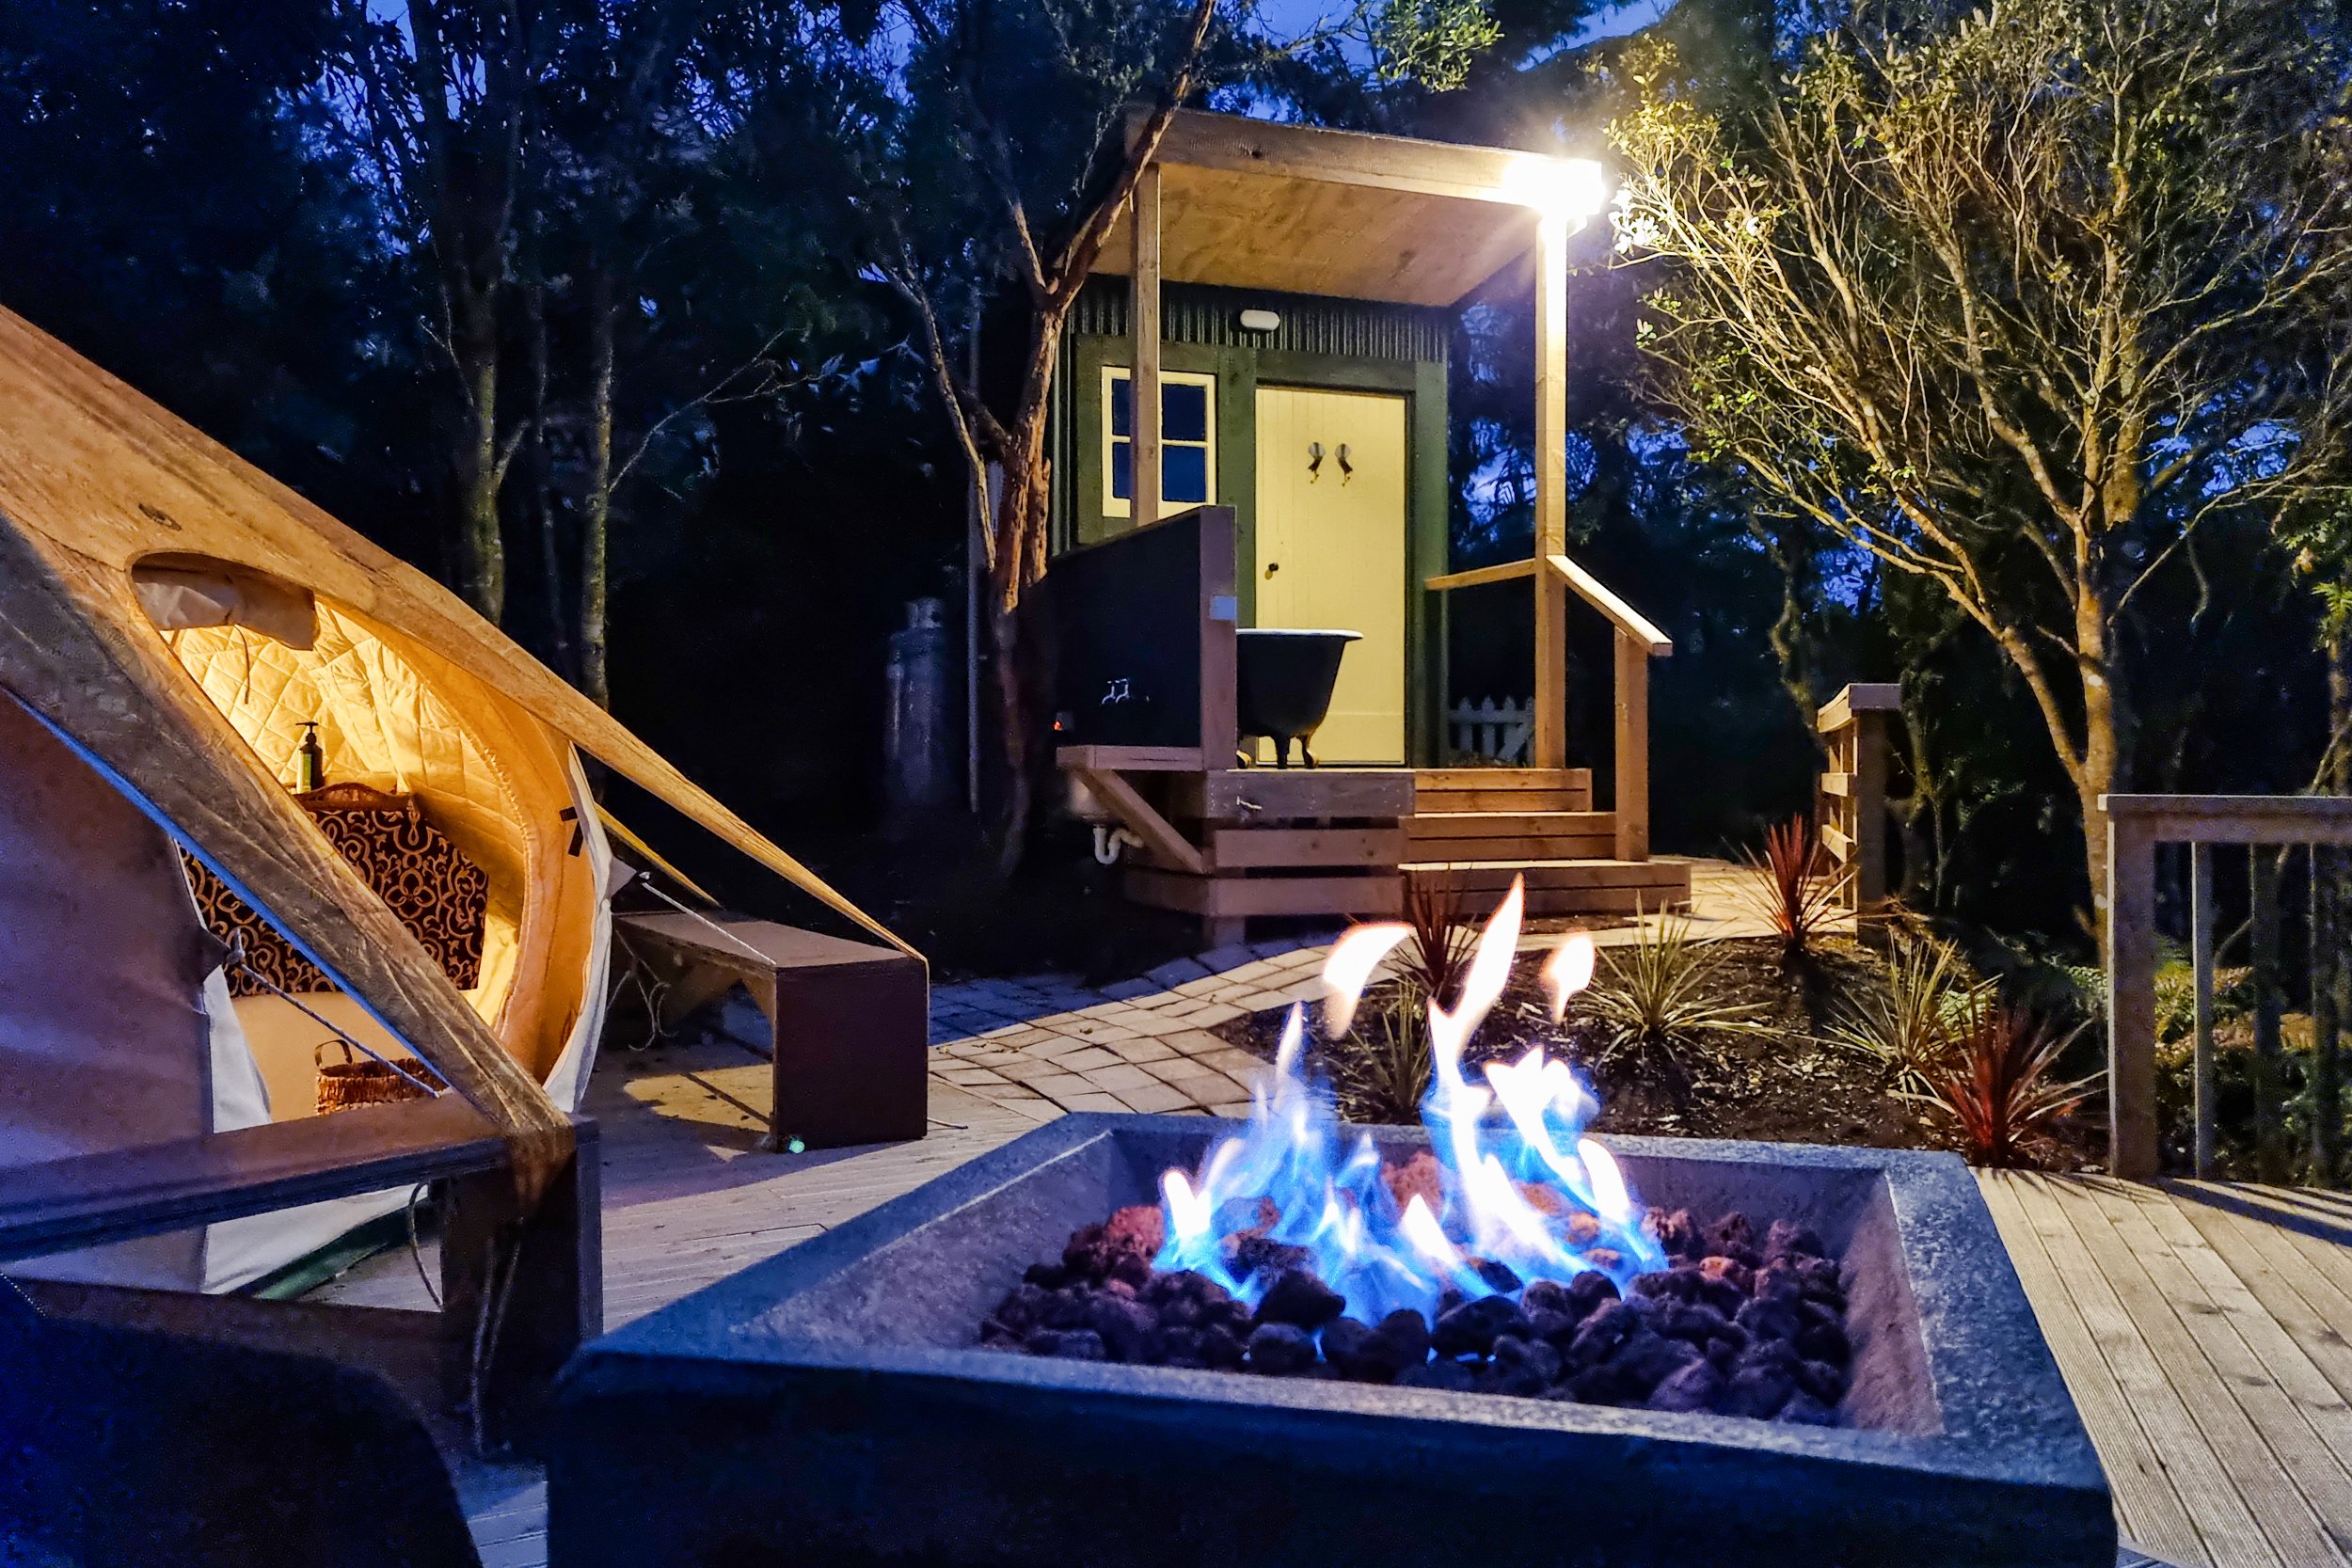 Relax and unwind next the glamping tent fire